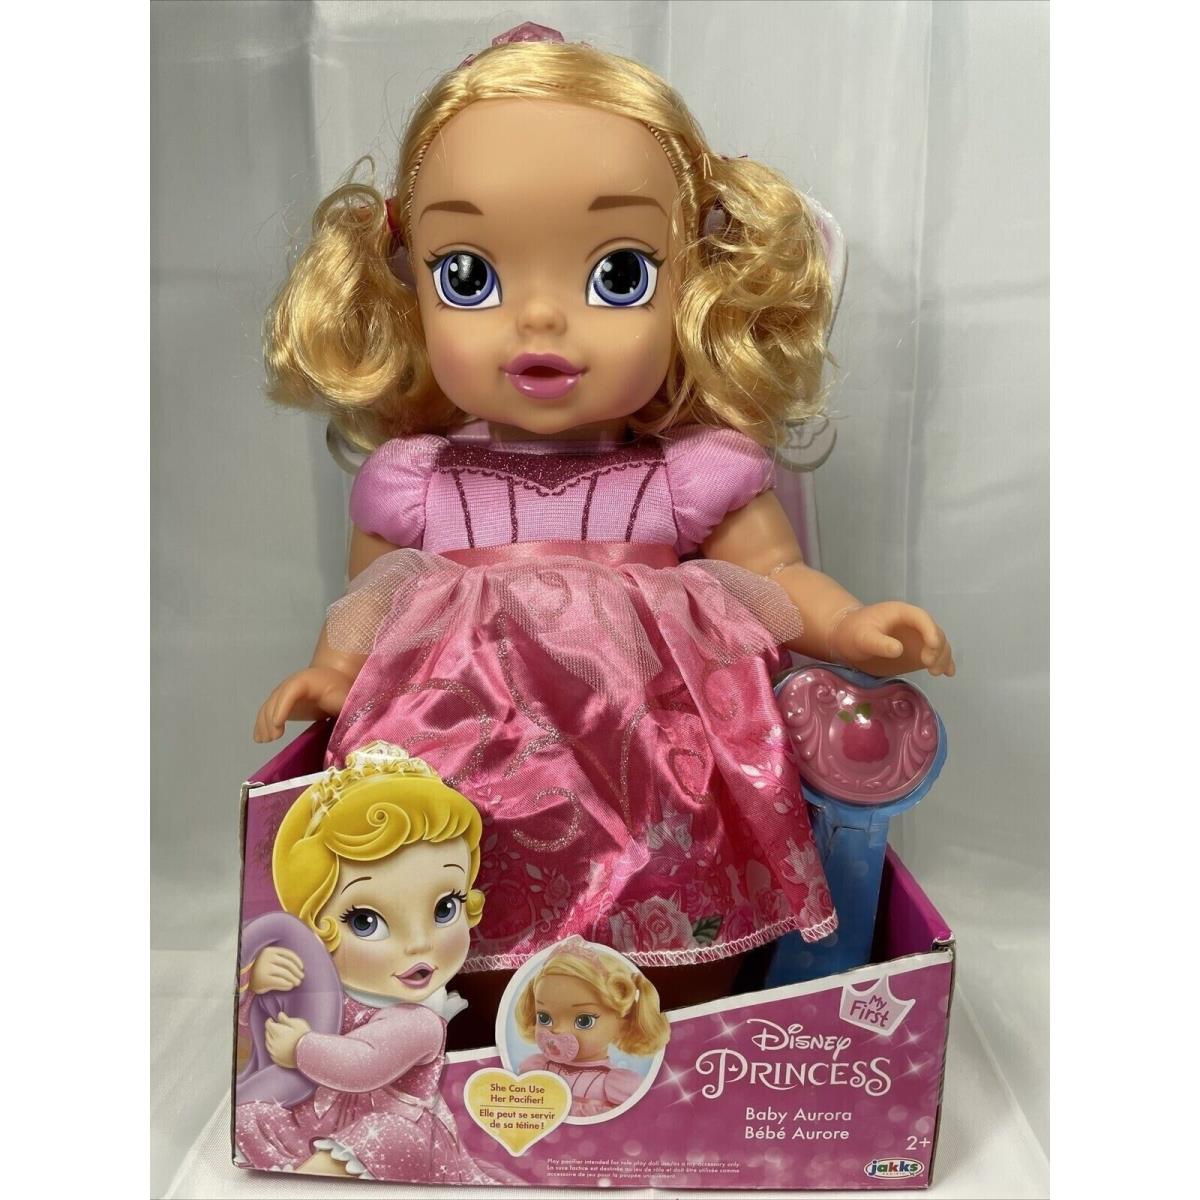 Disney Princess Deluxe Baby Aurora Doll with Pacifier Baby Doll Toy / 2019